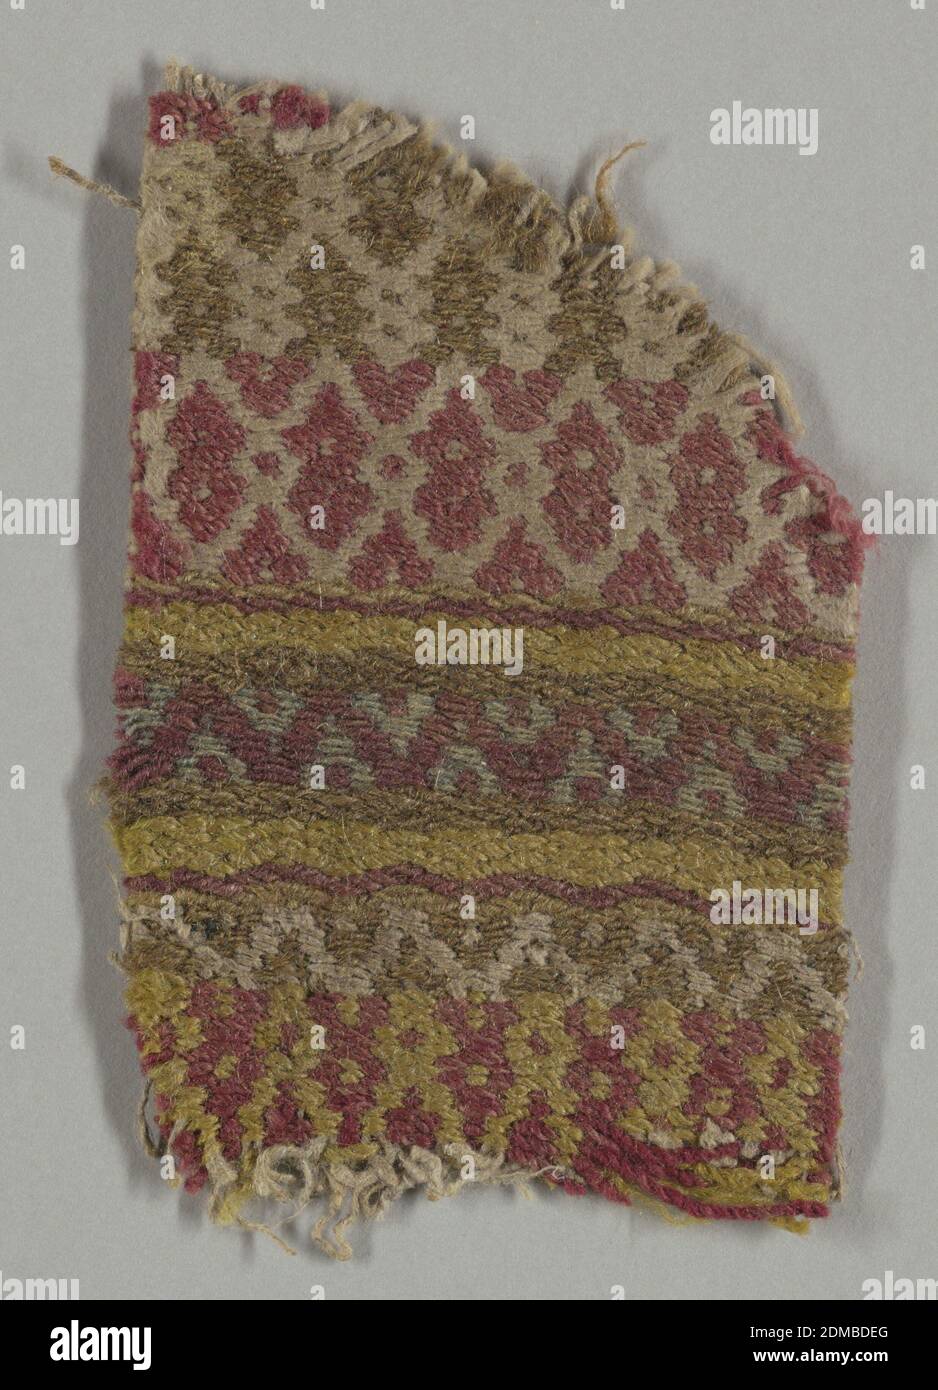 Textile, Medium: wool, linen Technique: complementary weft, Coarse wool and hand-spun linen in brown, yellow, red, and white. Patterning of simple geometric bands and lozenges. Patterned by weft floats that hide warps entirely. Heavy woolen wefts used two at a time in contrasting colors rise from the face to back of fabric in a compound weft satin., Sweden, 19th century, woven textiles, Textile Stock Photo